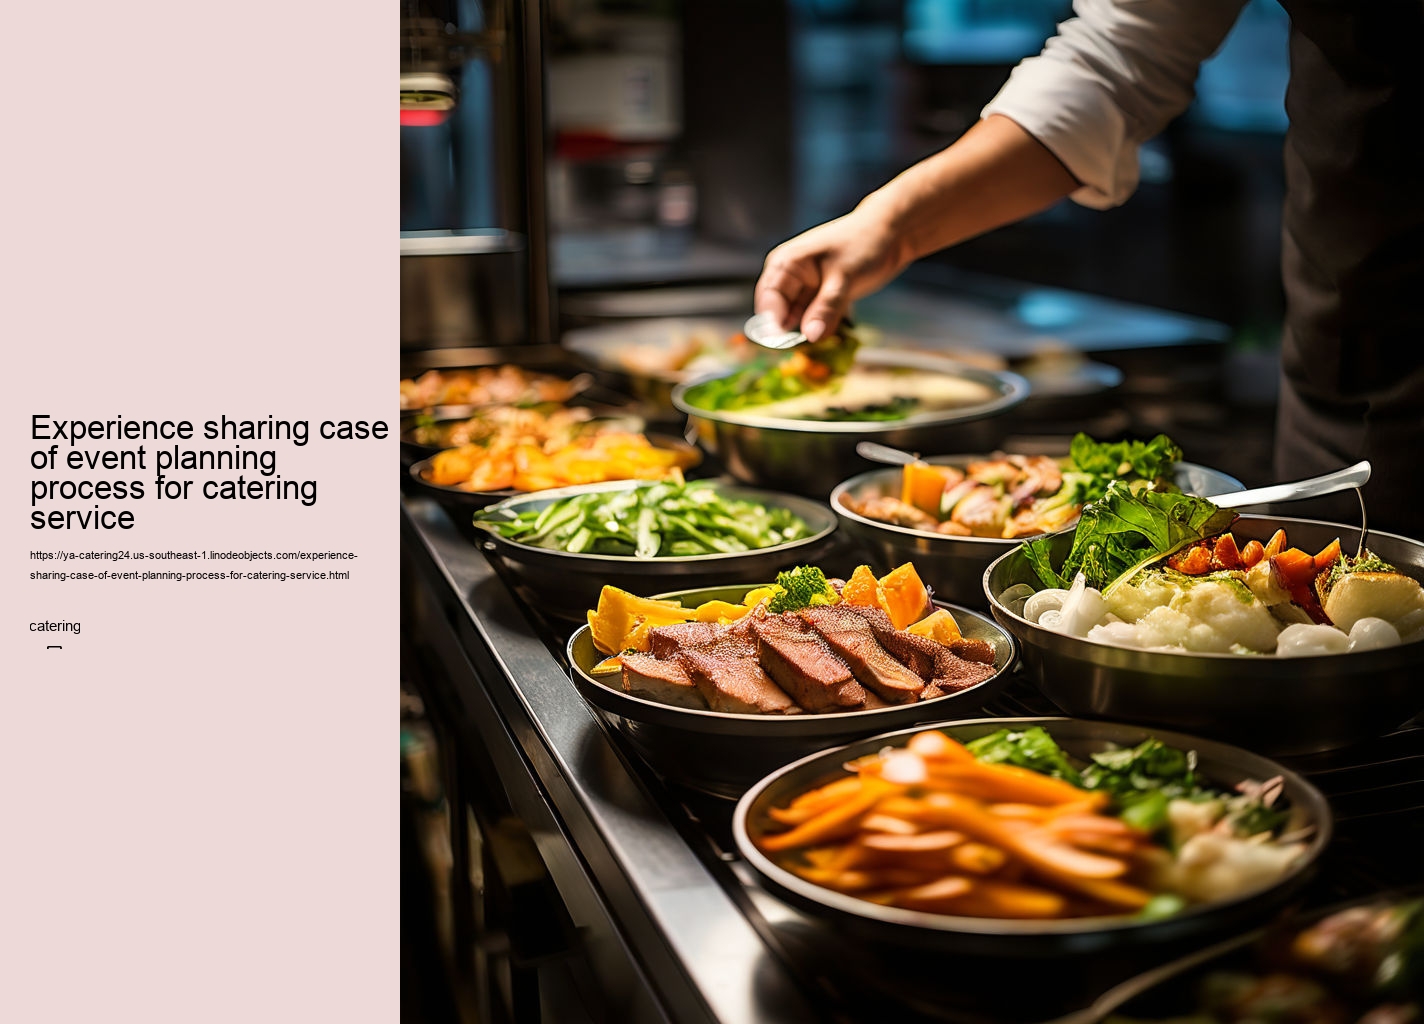 Experience sharing case of event planning process for catering service